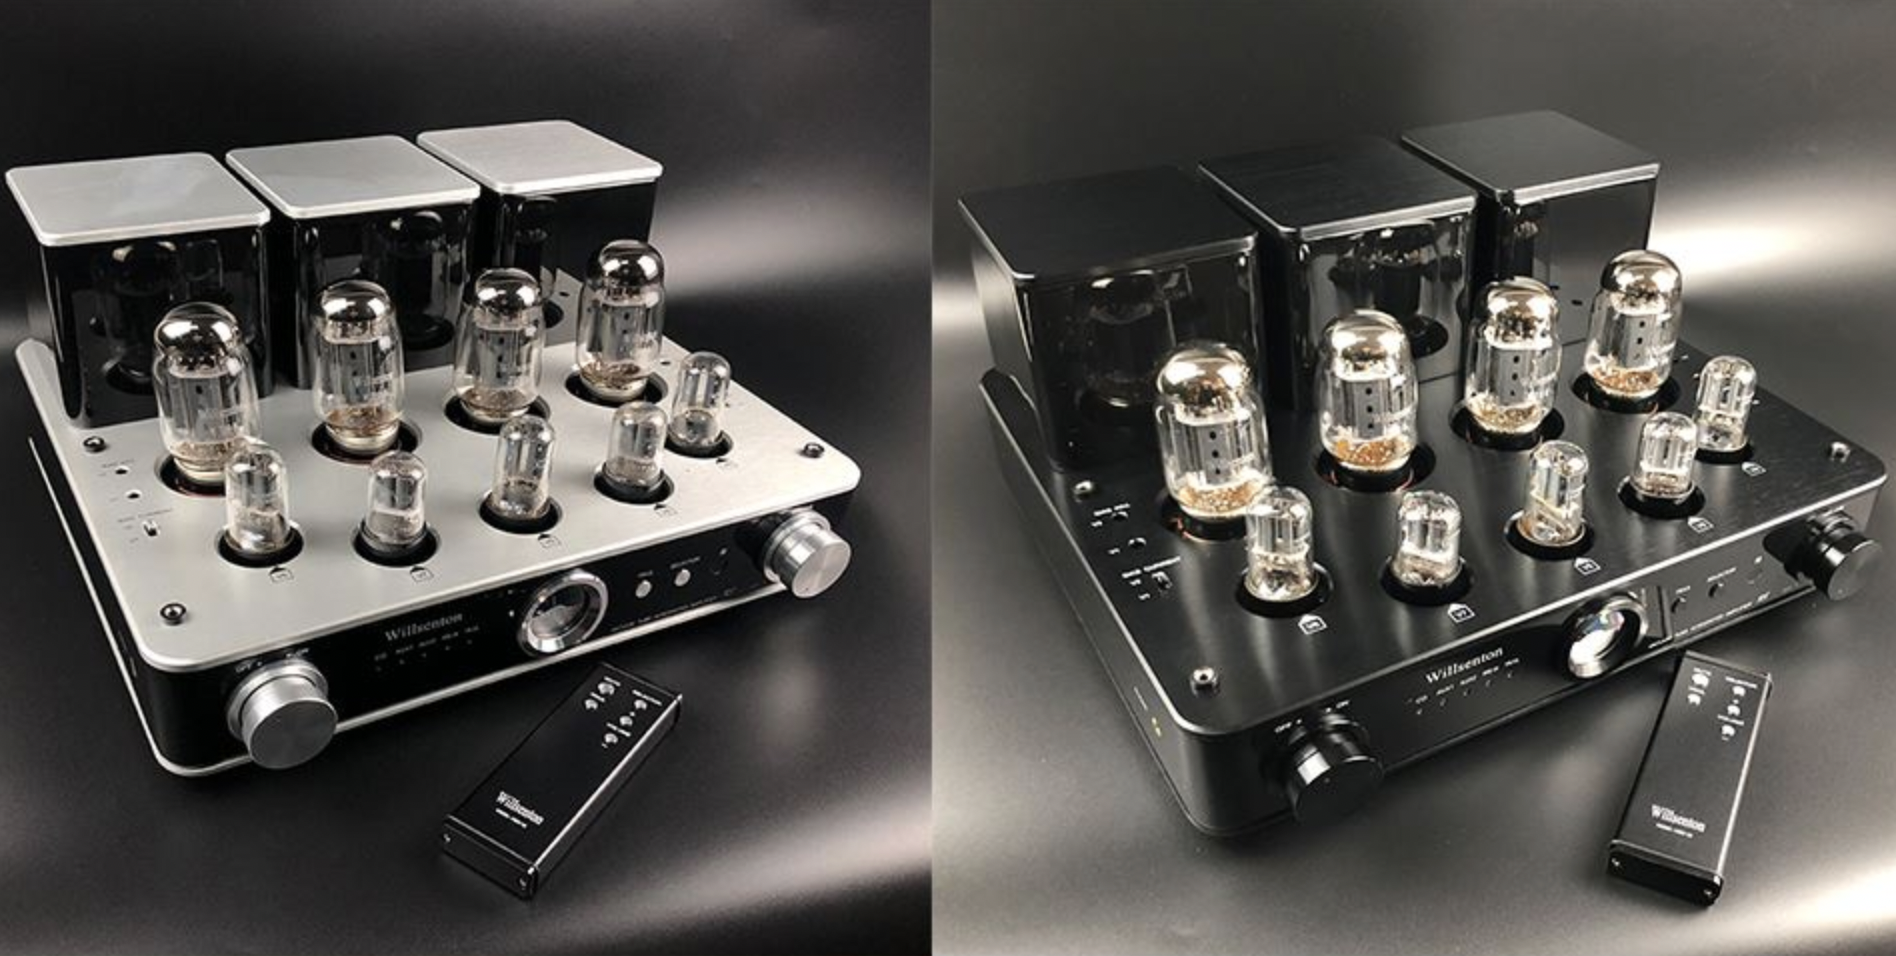 Best Headphone Amp and DAC 2022 — ON